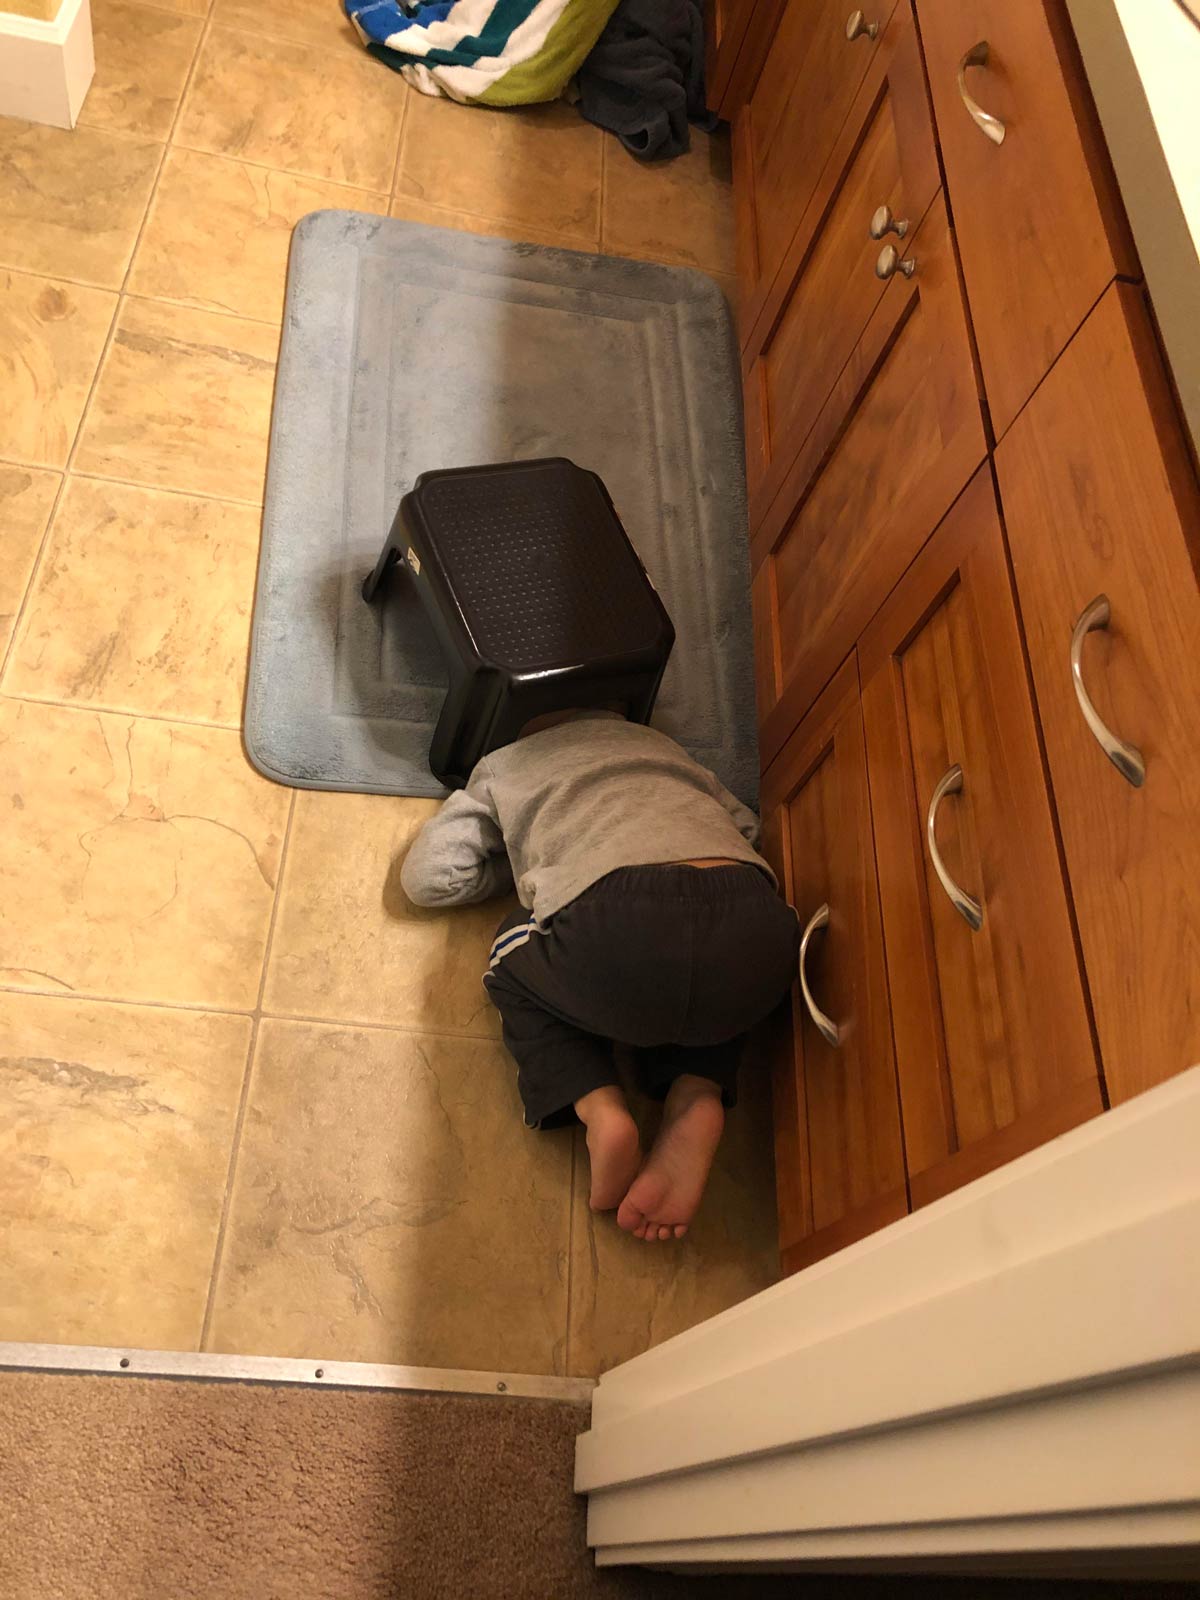 Playing hide and seek with a 2 year old